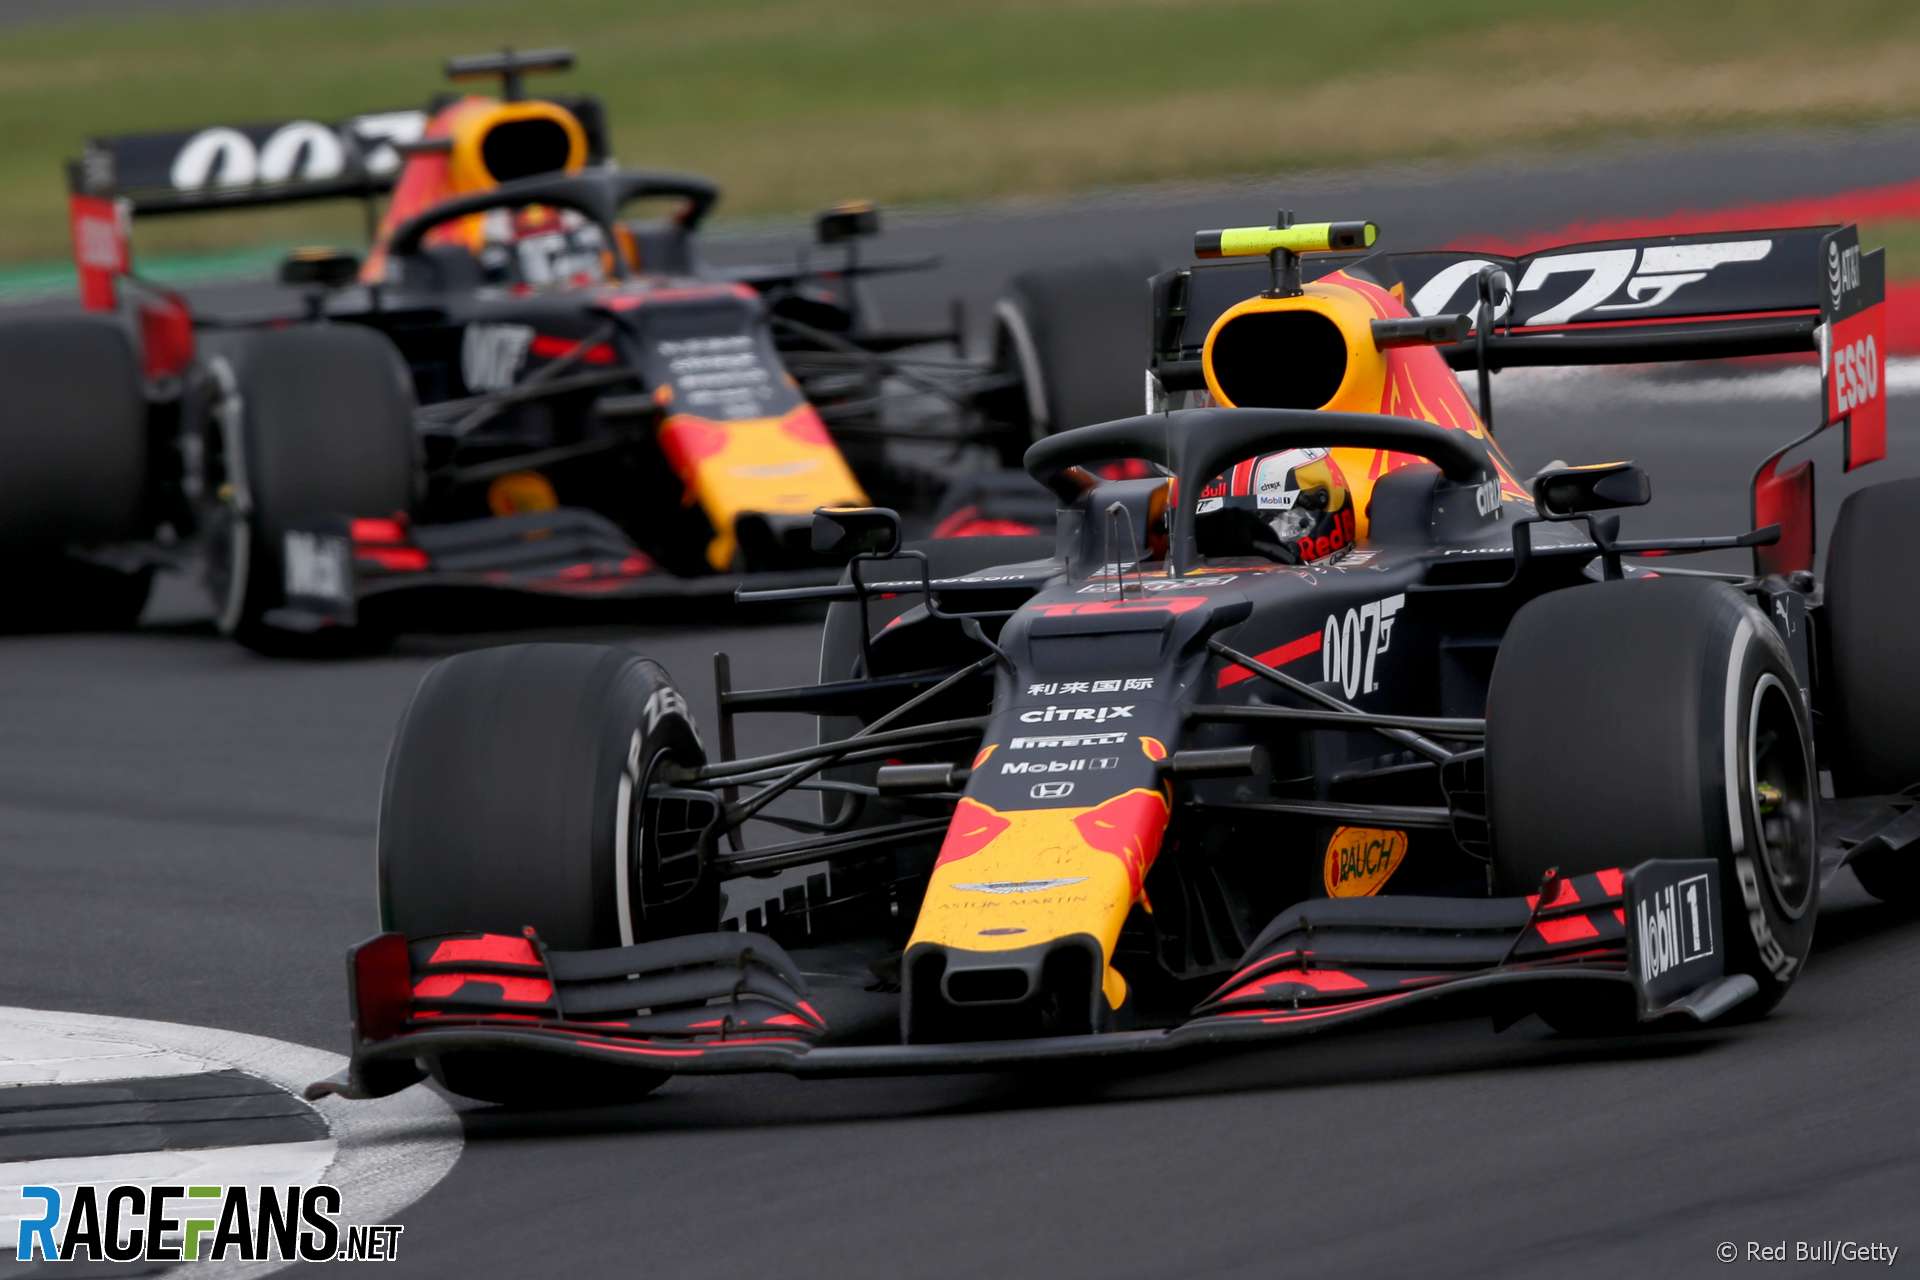 “I’m not holding him”: Why Horner had to order Gasly to let Verstappen through